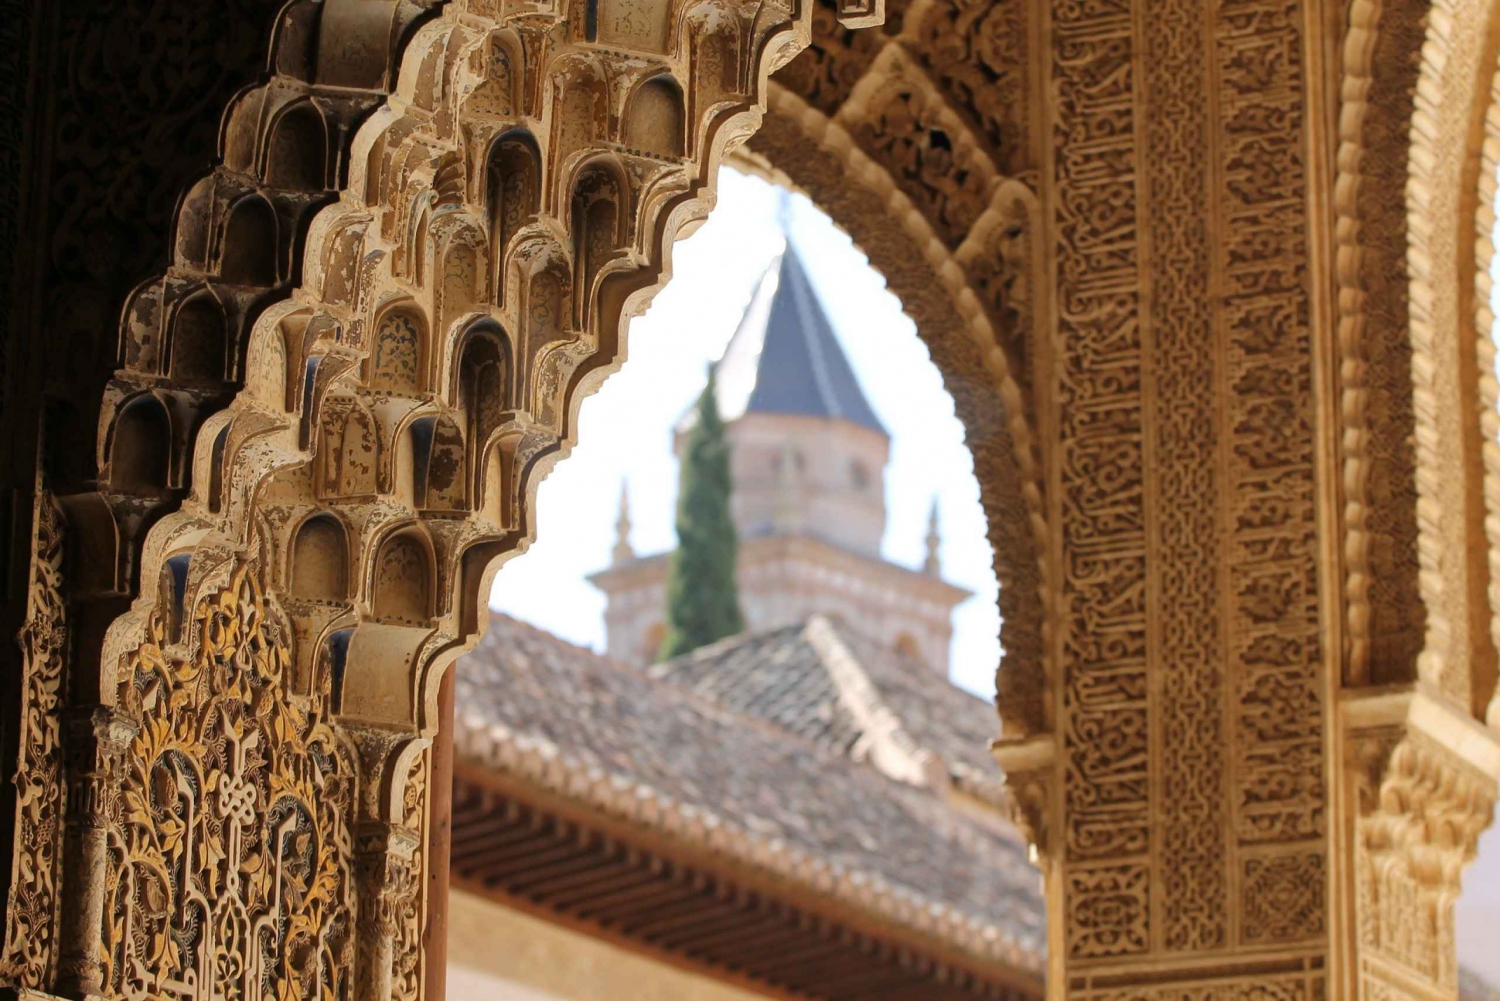 Malaga: Granada Day Trip with Alhambra, Palaces and Gardens